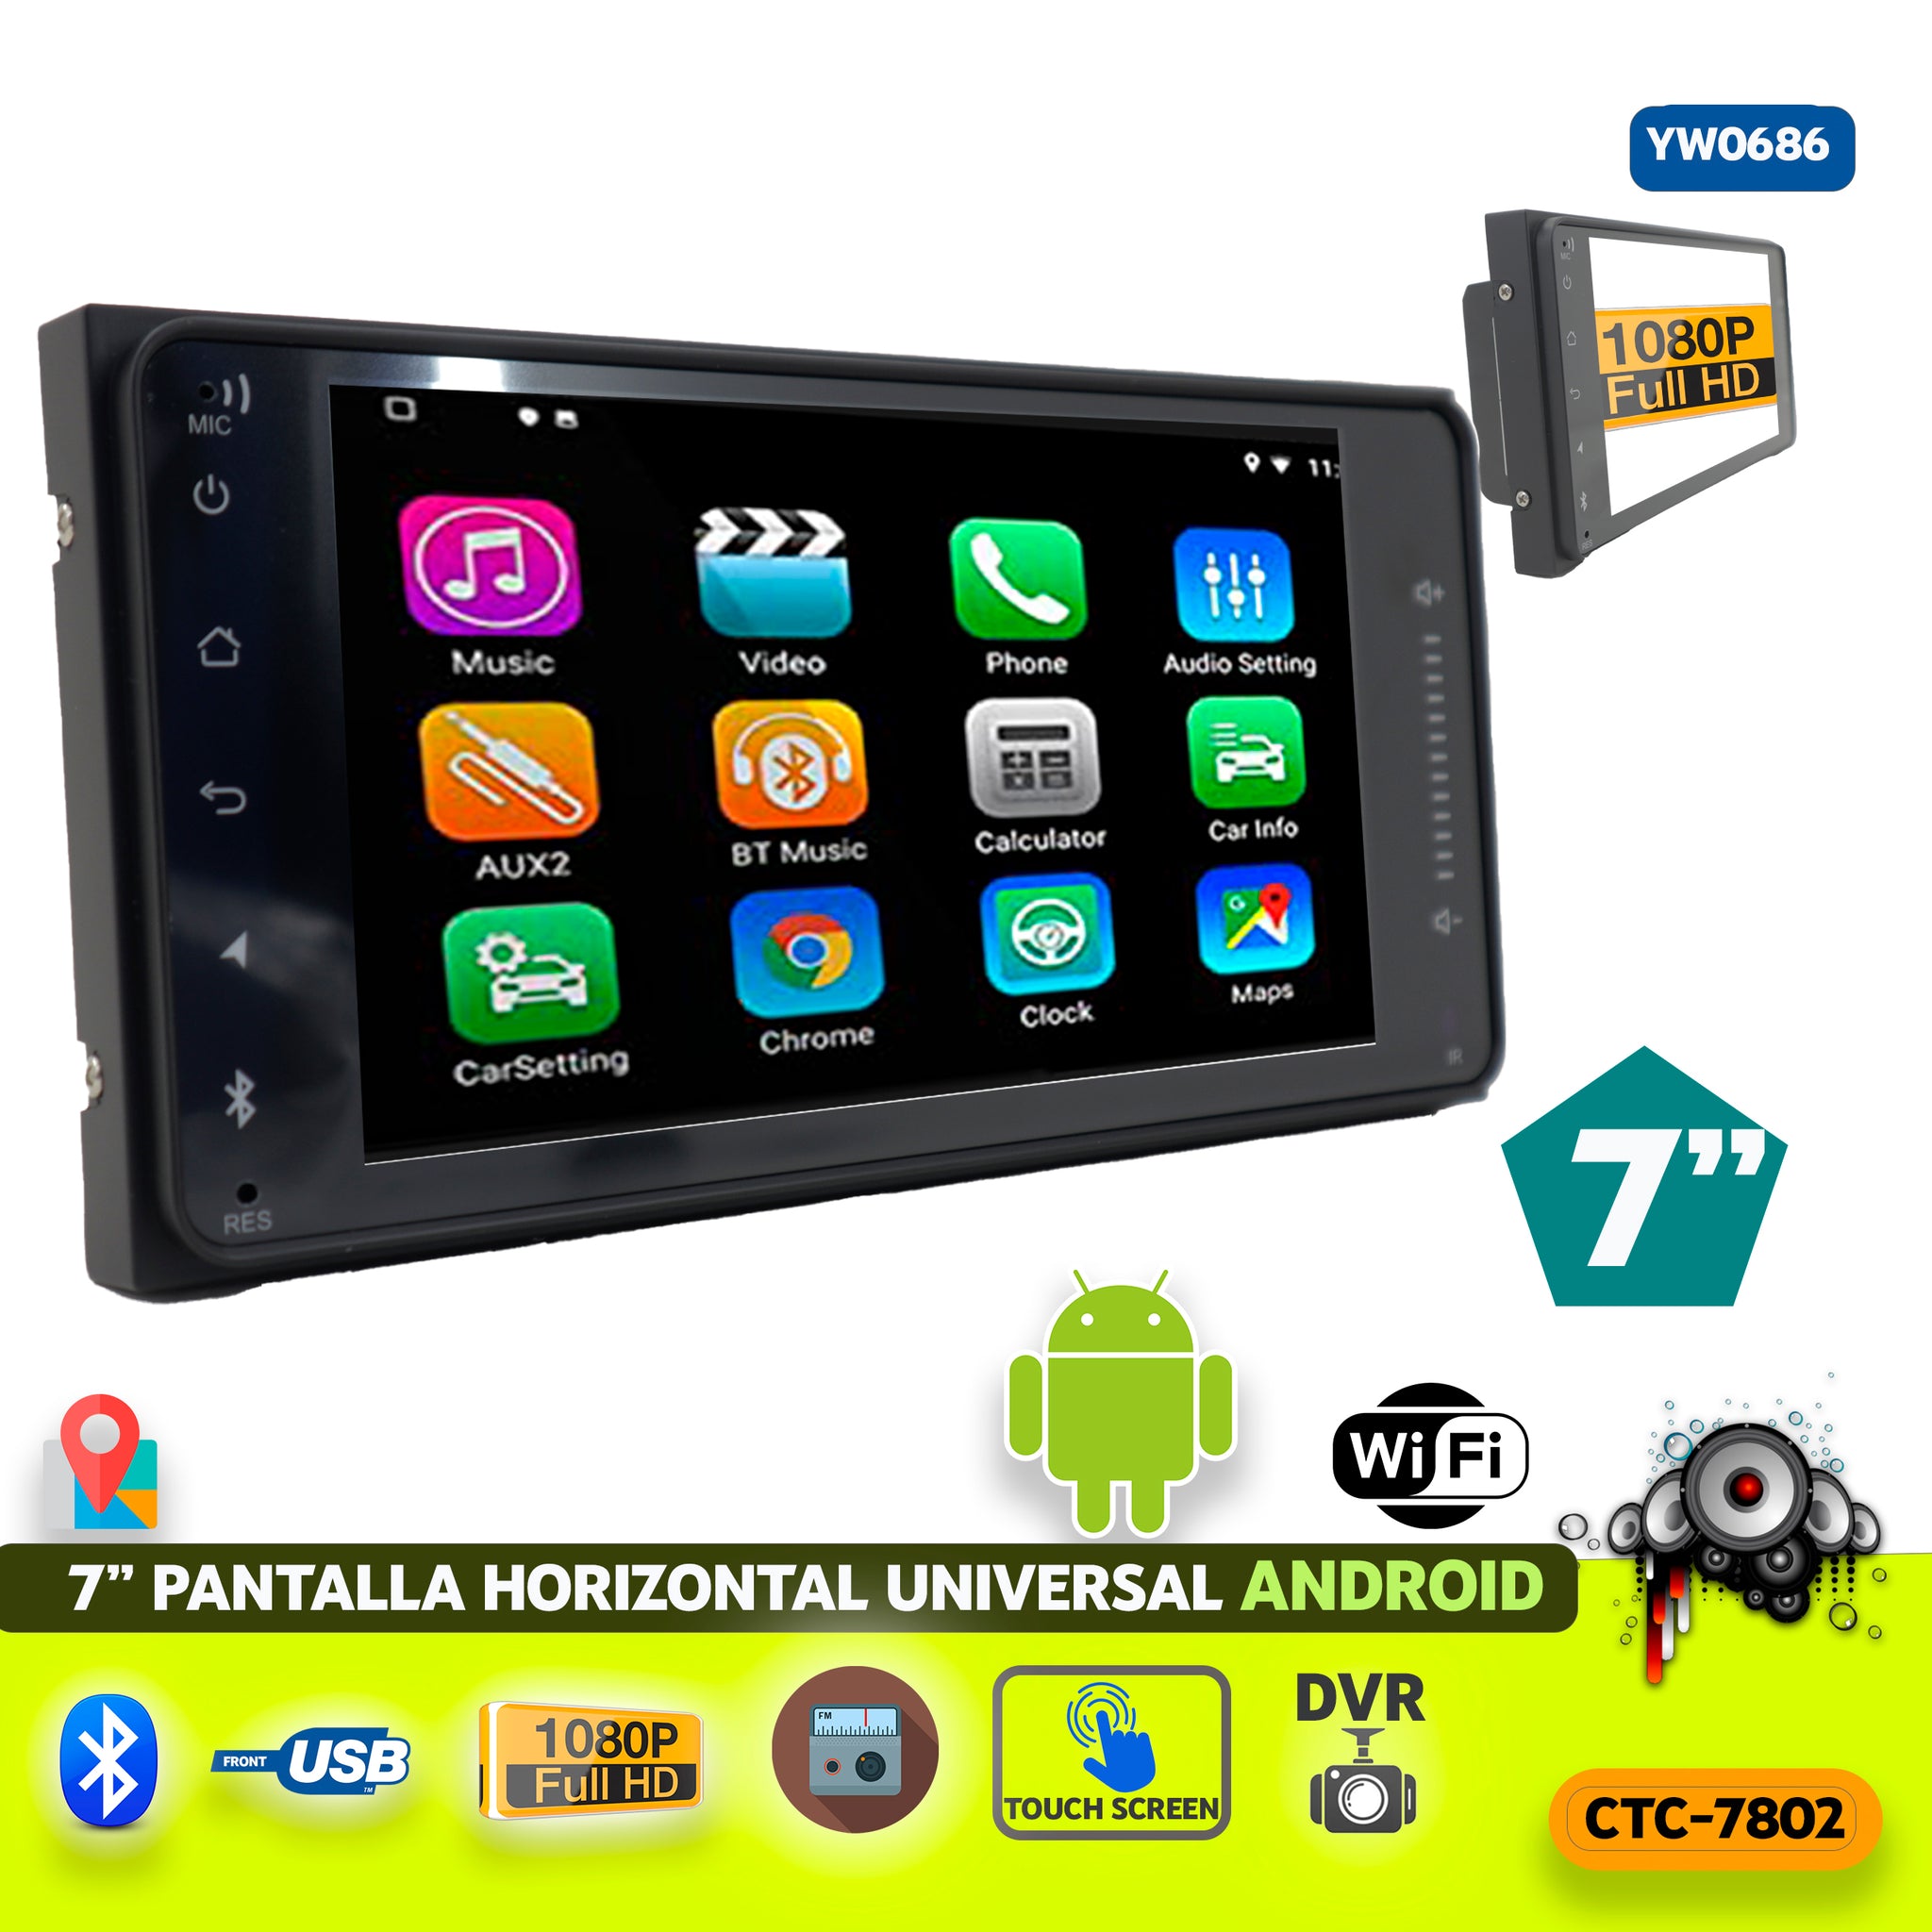 EQUIPO MULTIMEDIA CTC-8227 7INCH, DOUBLE DIN, 1+16G ANDROID –